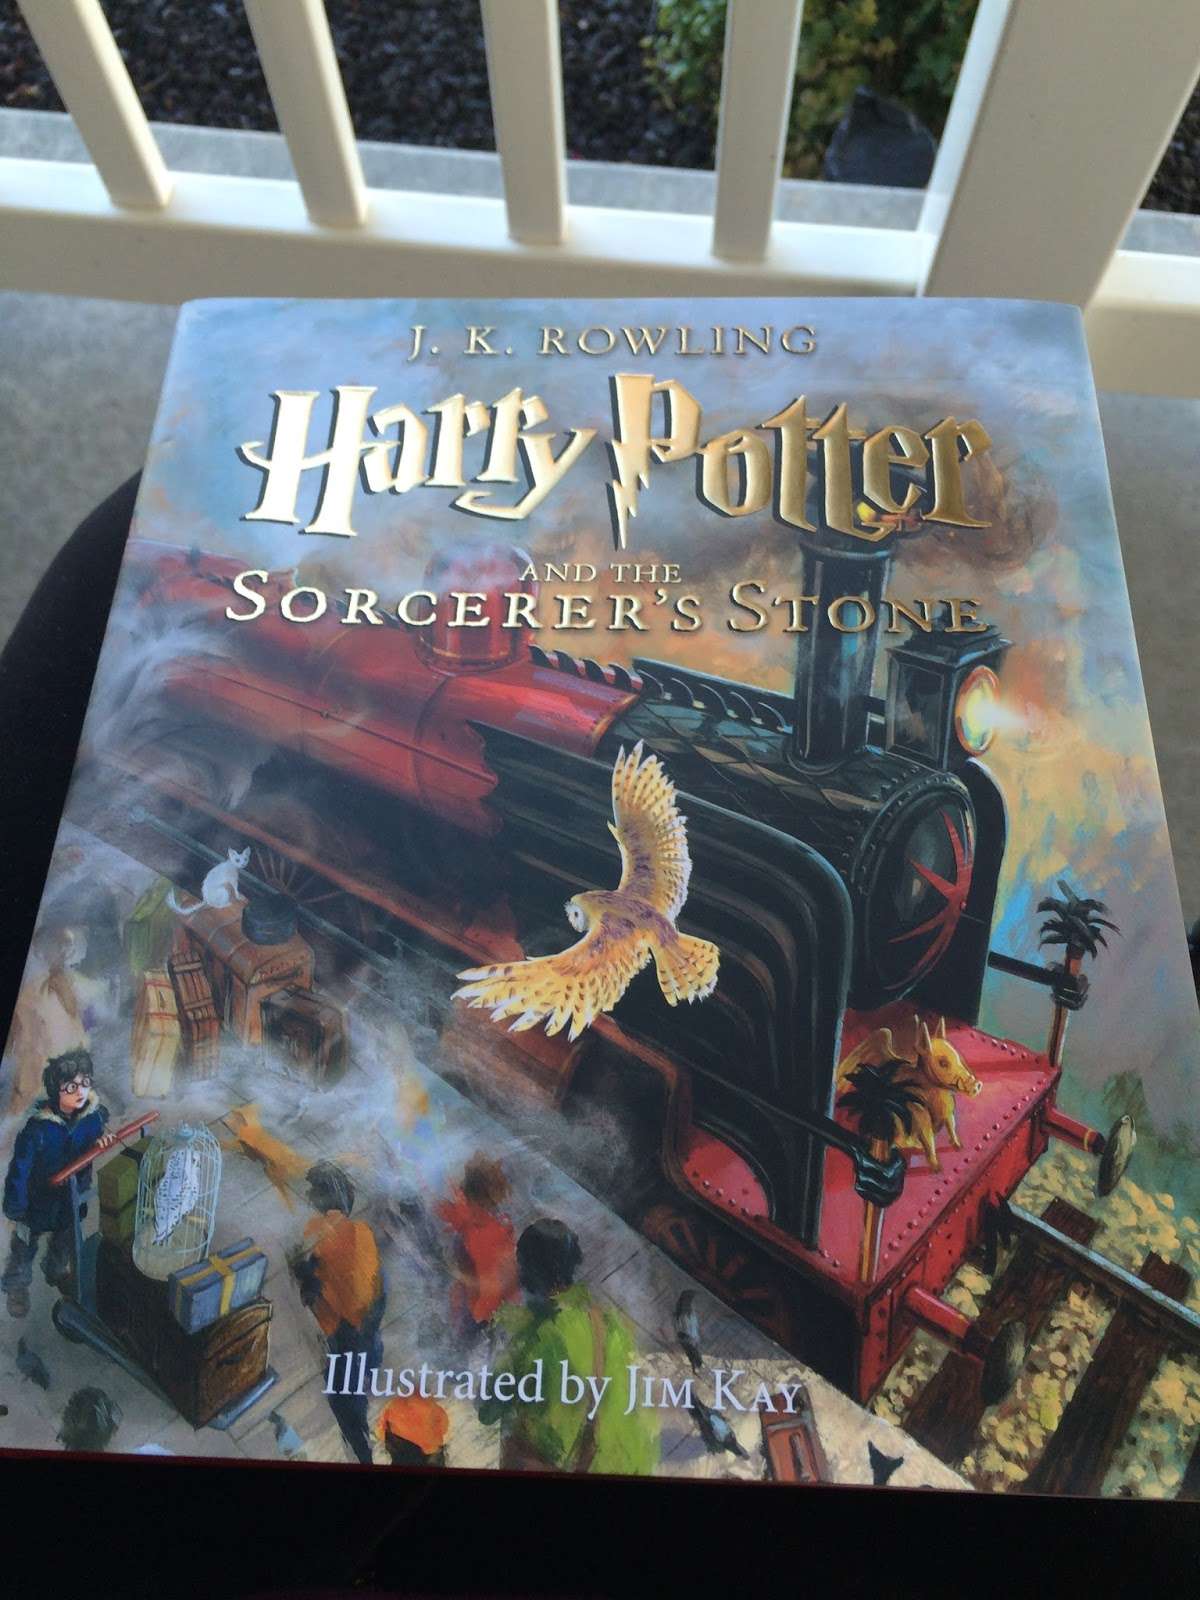 Book Review: The Illustrated Harry Potter Book